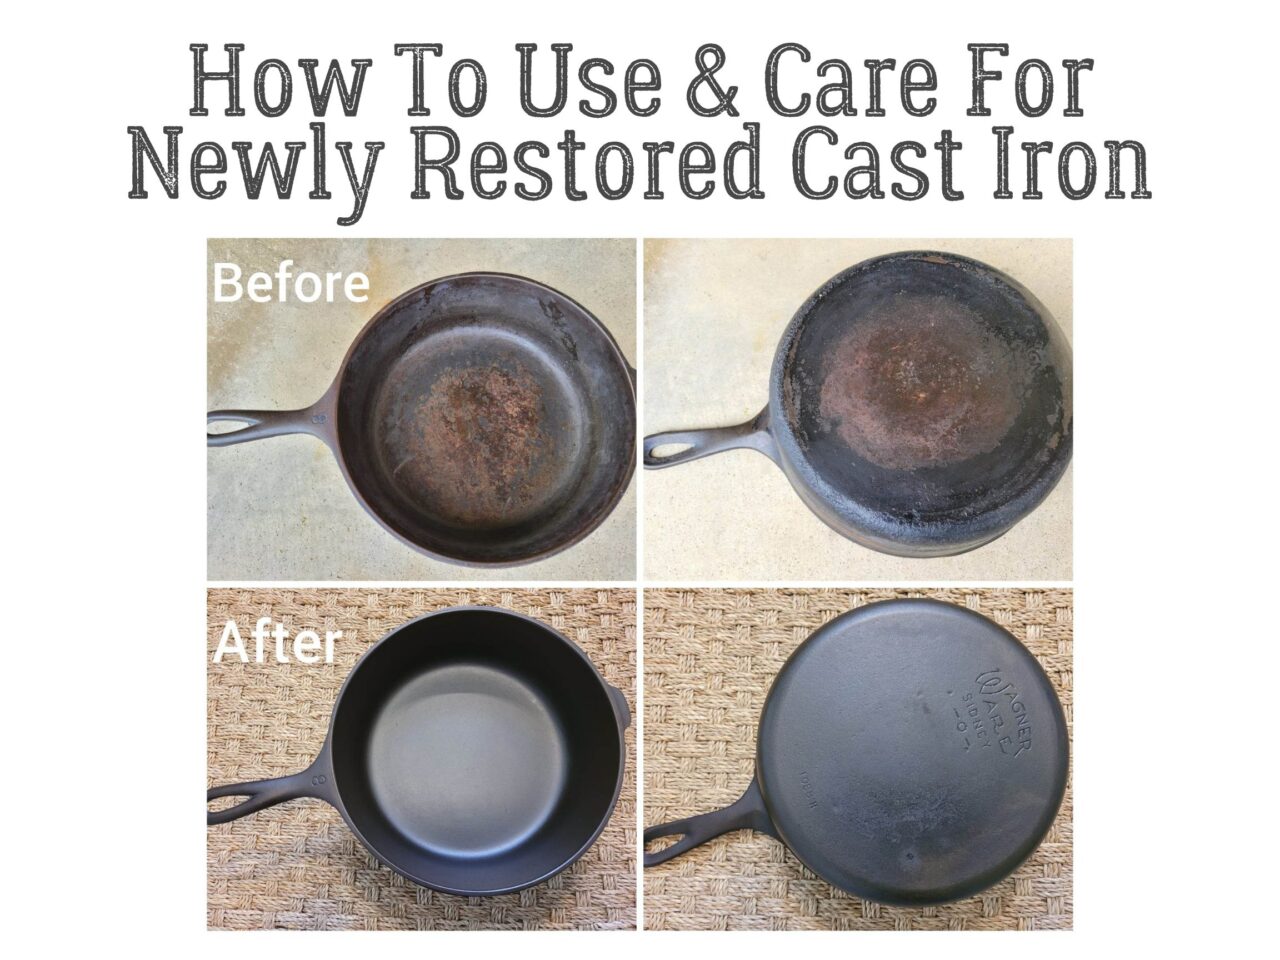 Campfires and Cast Iron - Camping Recipes & Cast Iron Care